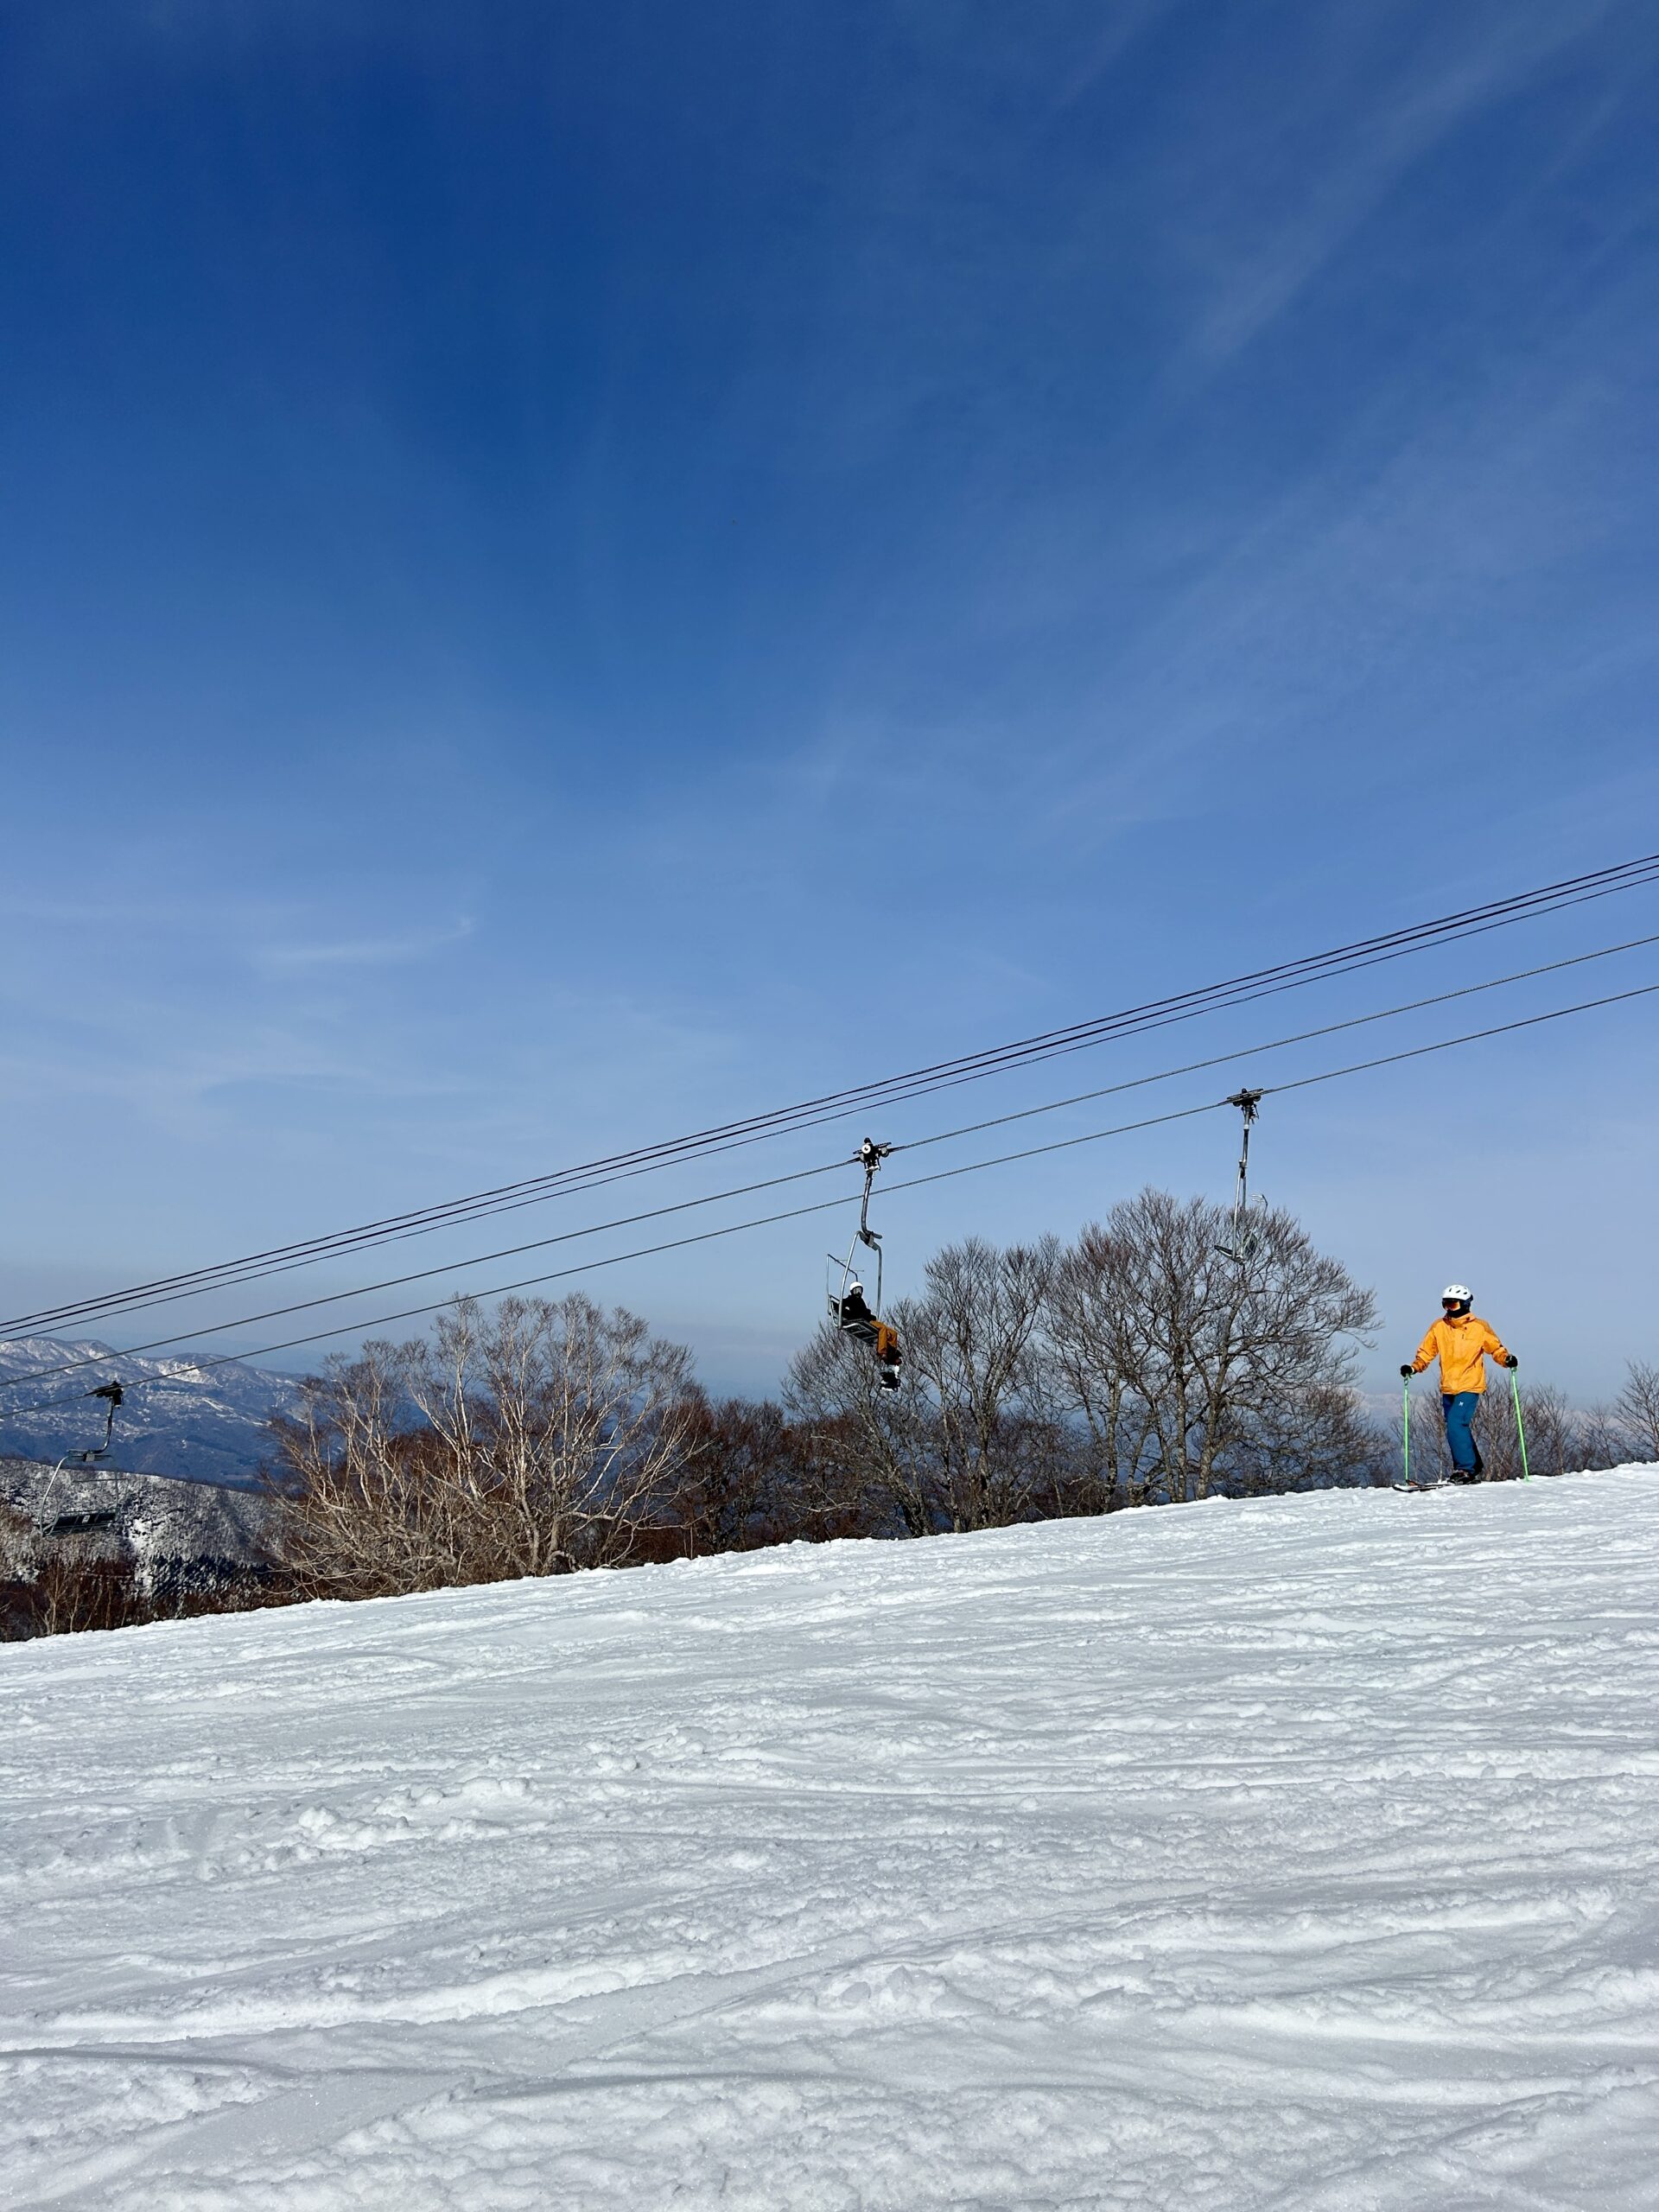 Despite the warm weather most lifts and gondolas are running at the top of Mt. Kenashi